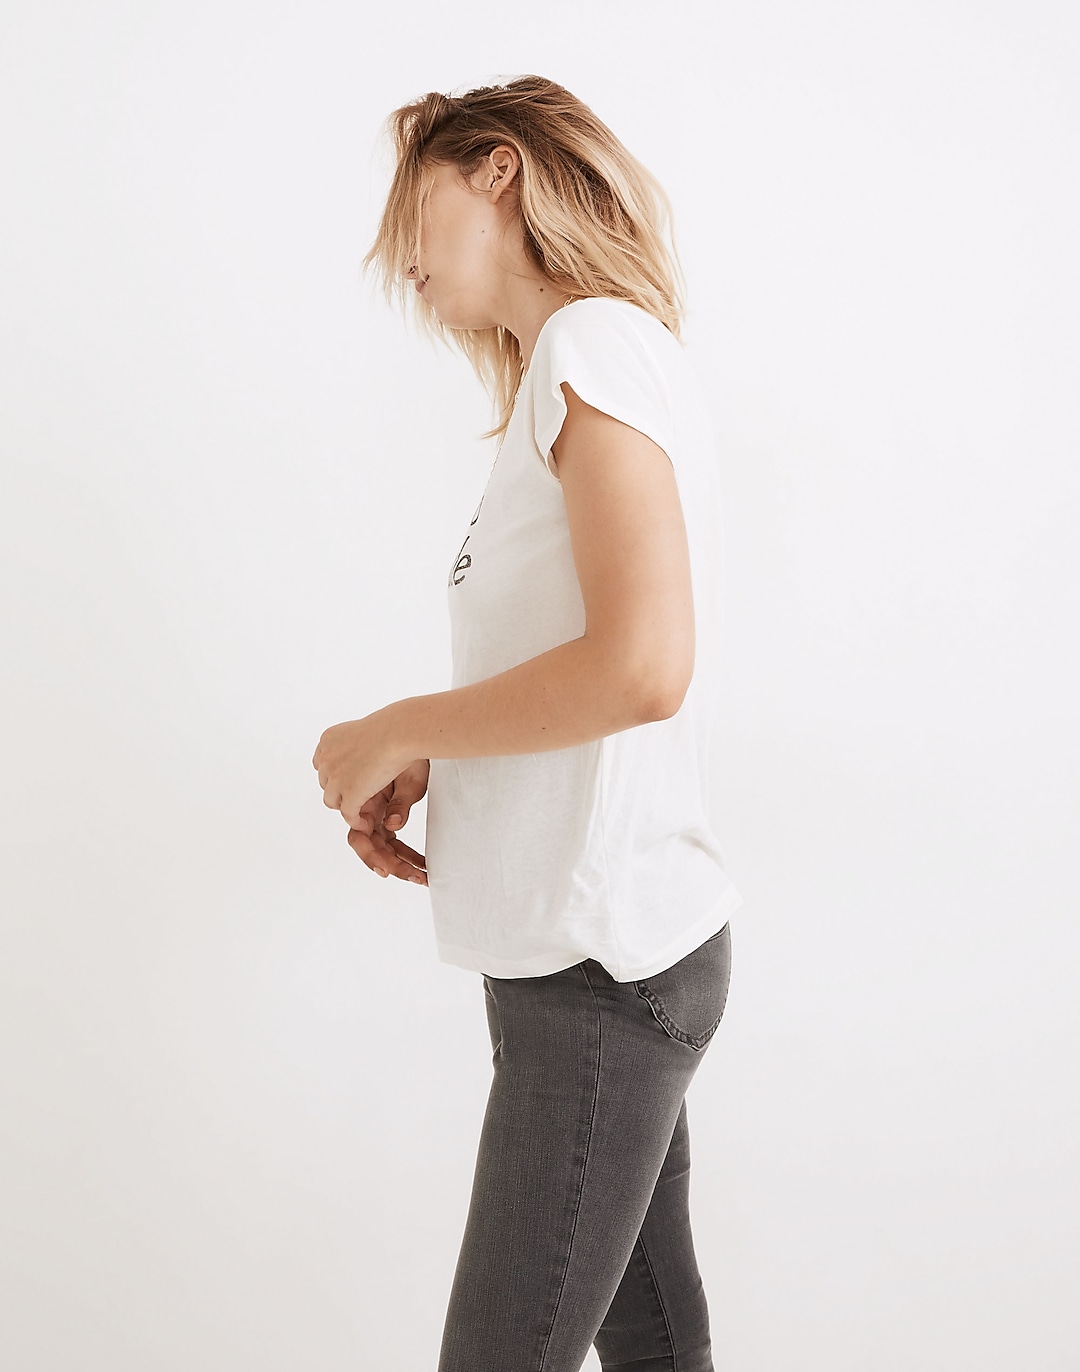 Let's Go Outside Graphic Softfade Cotton Tee | Madewell